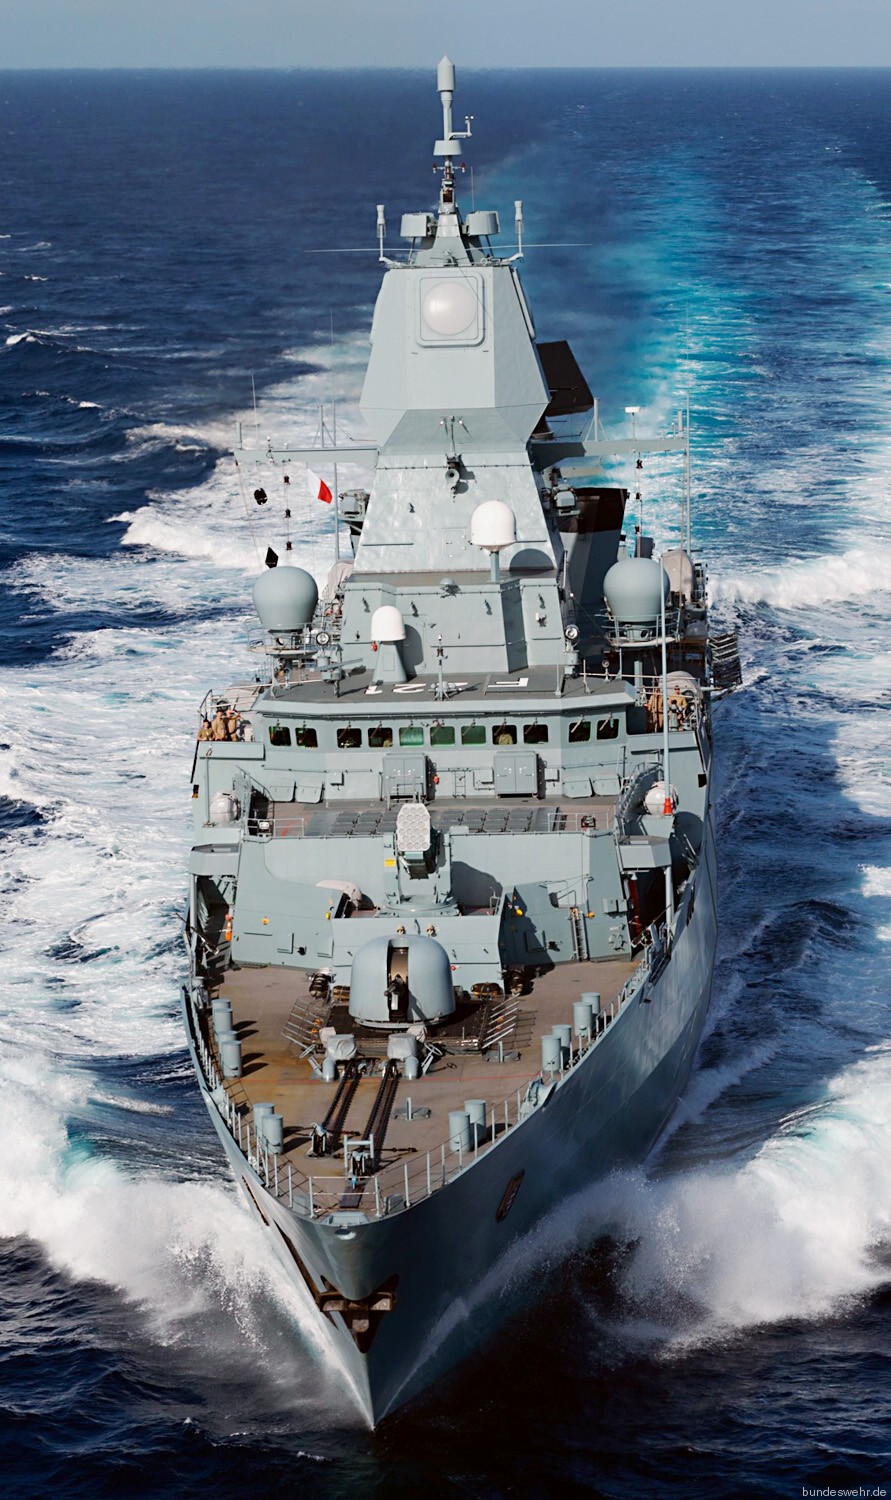 type 124 sachsen class guided missile frigate german navy f-221 fgs hessen 11x